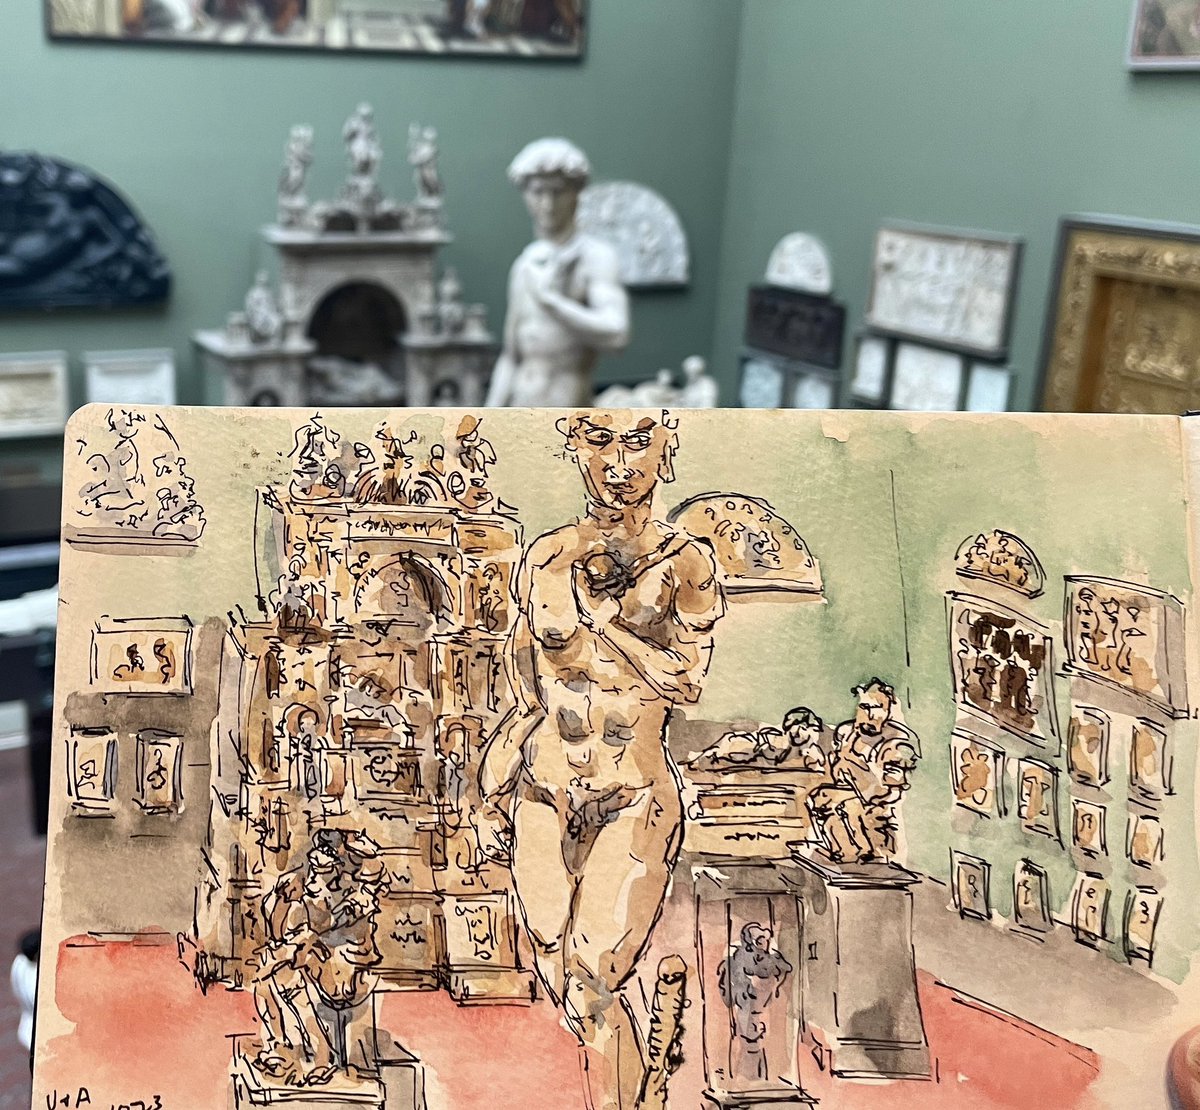 Sketching at the V&A proved to be more difficult than I expected. Mostly due to the number of people leaning over my shoulder 😂

#victoriaandalbertmuseum #vanda #museum #sketch #moleskine #watercolour #drawing #art #historic #painting #sketchbook #artjournal